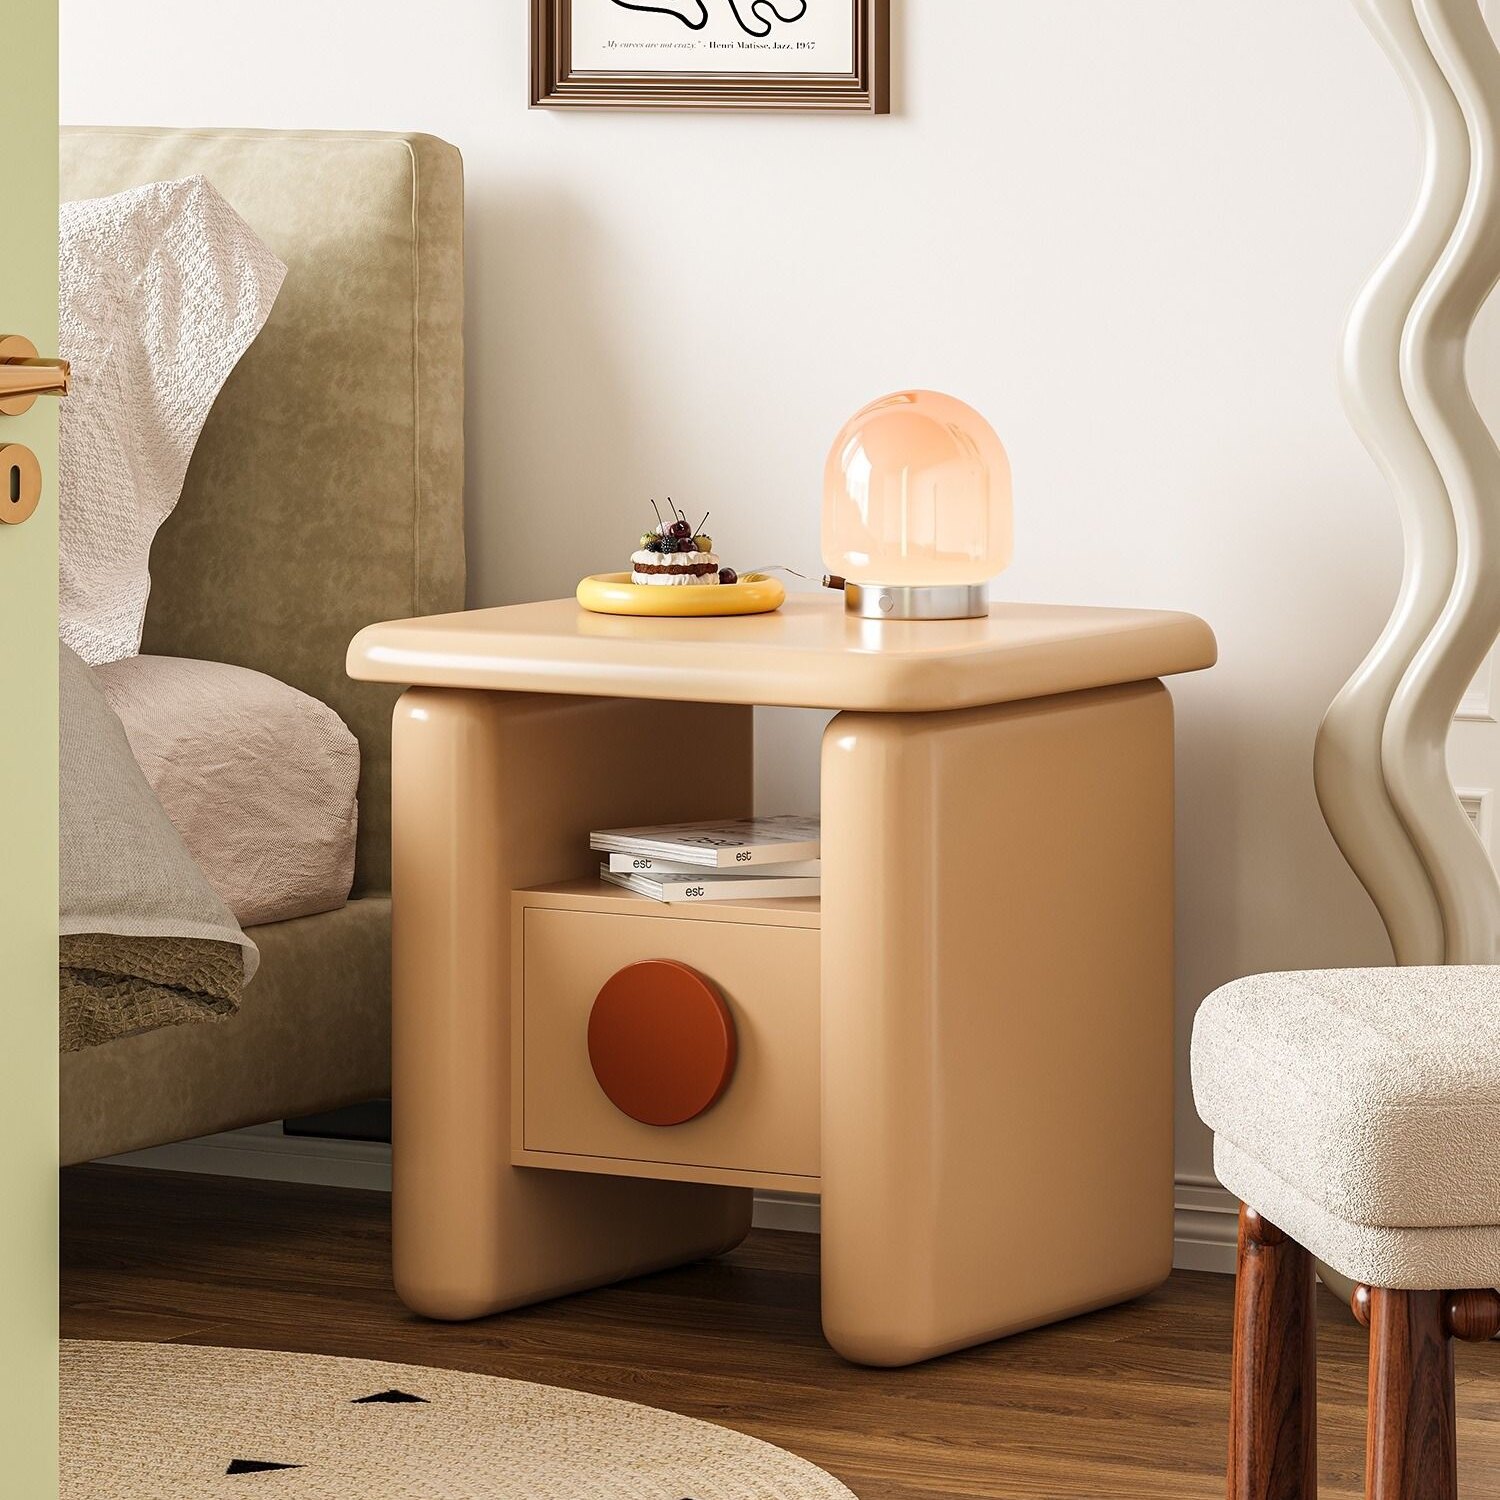 Sunset Glow Side Table Shop Unique Clocks Online Singapore Curated Aesthetic Home Decor Singapore Home Decor Online Coffee Table Side Table